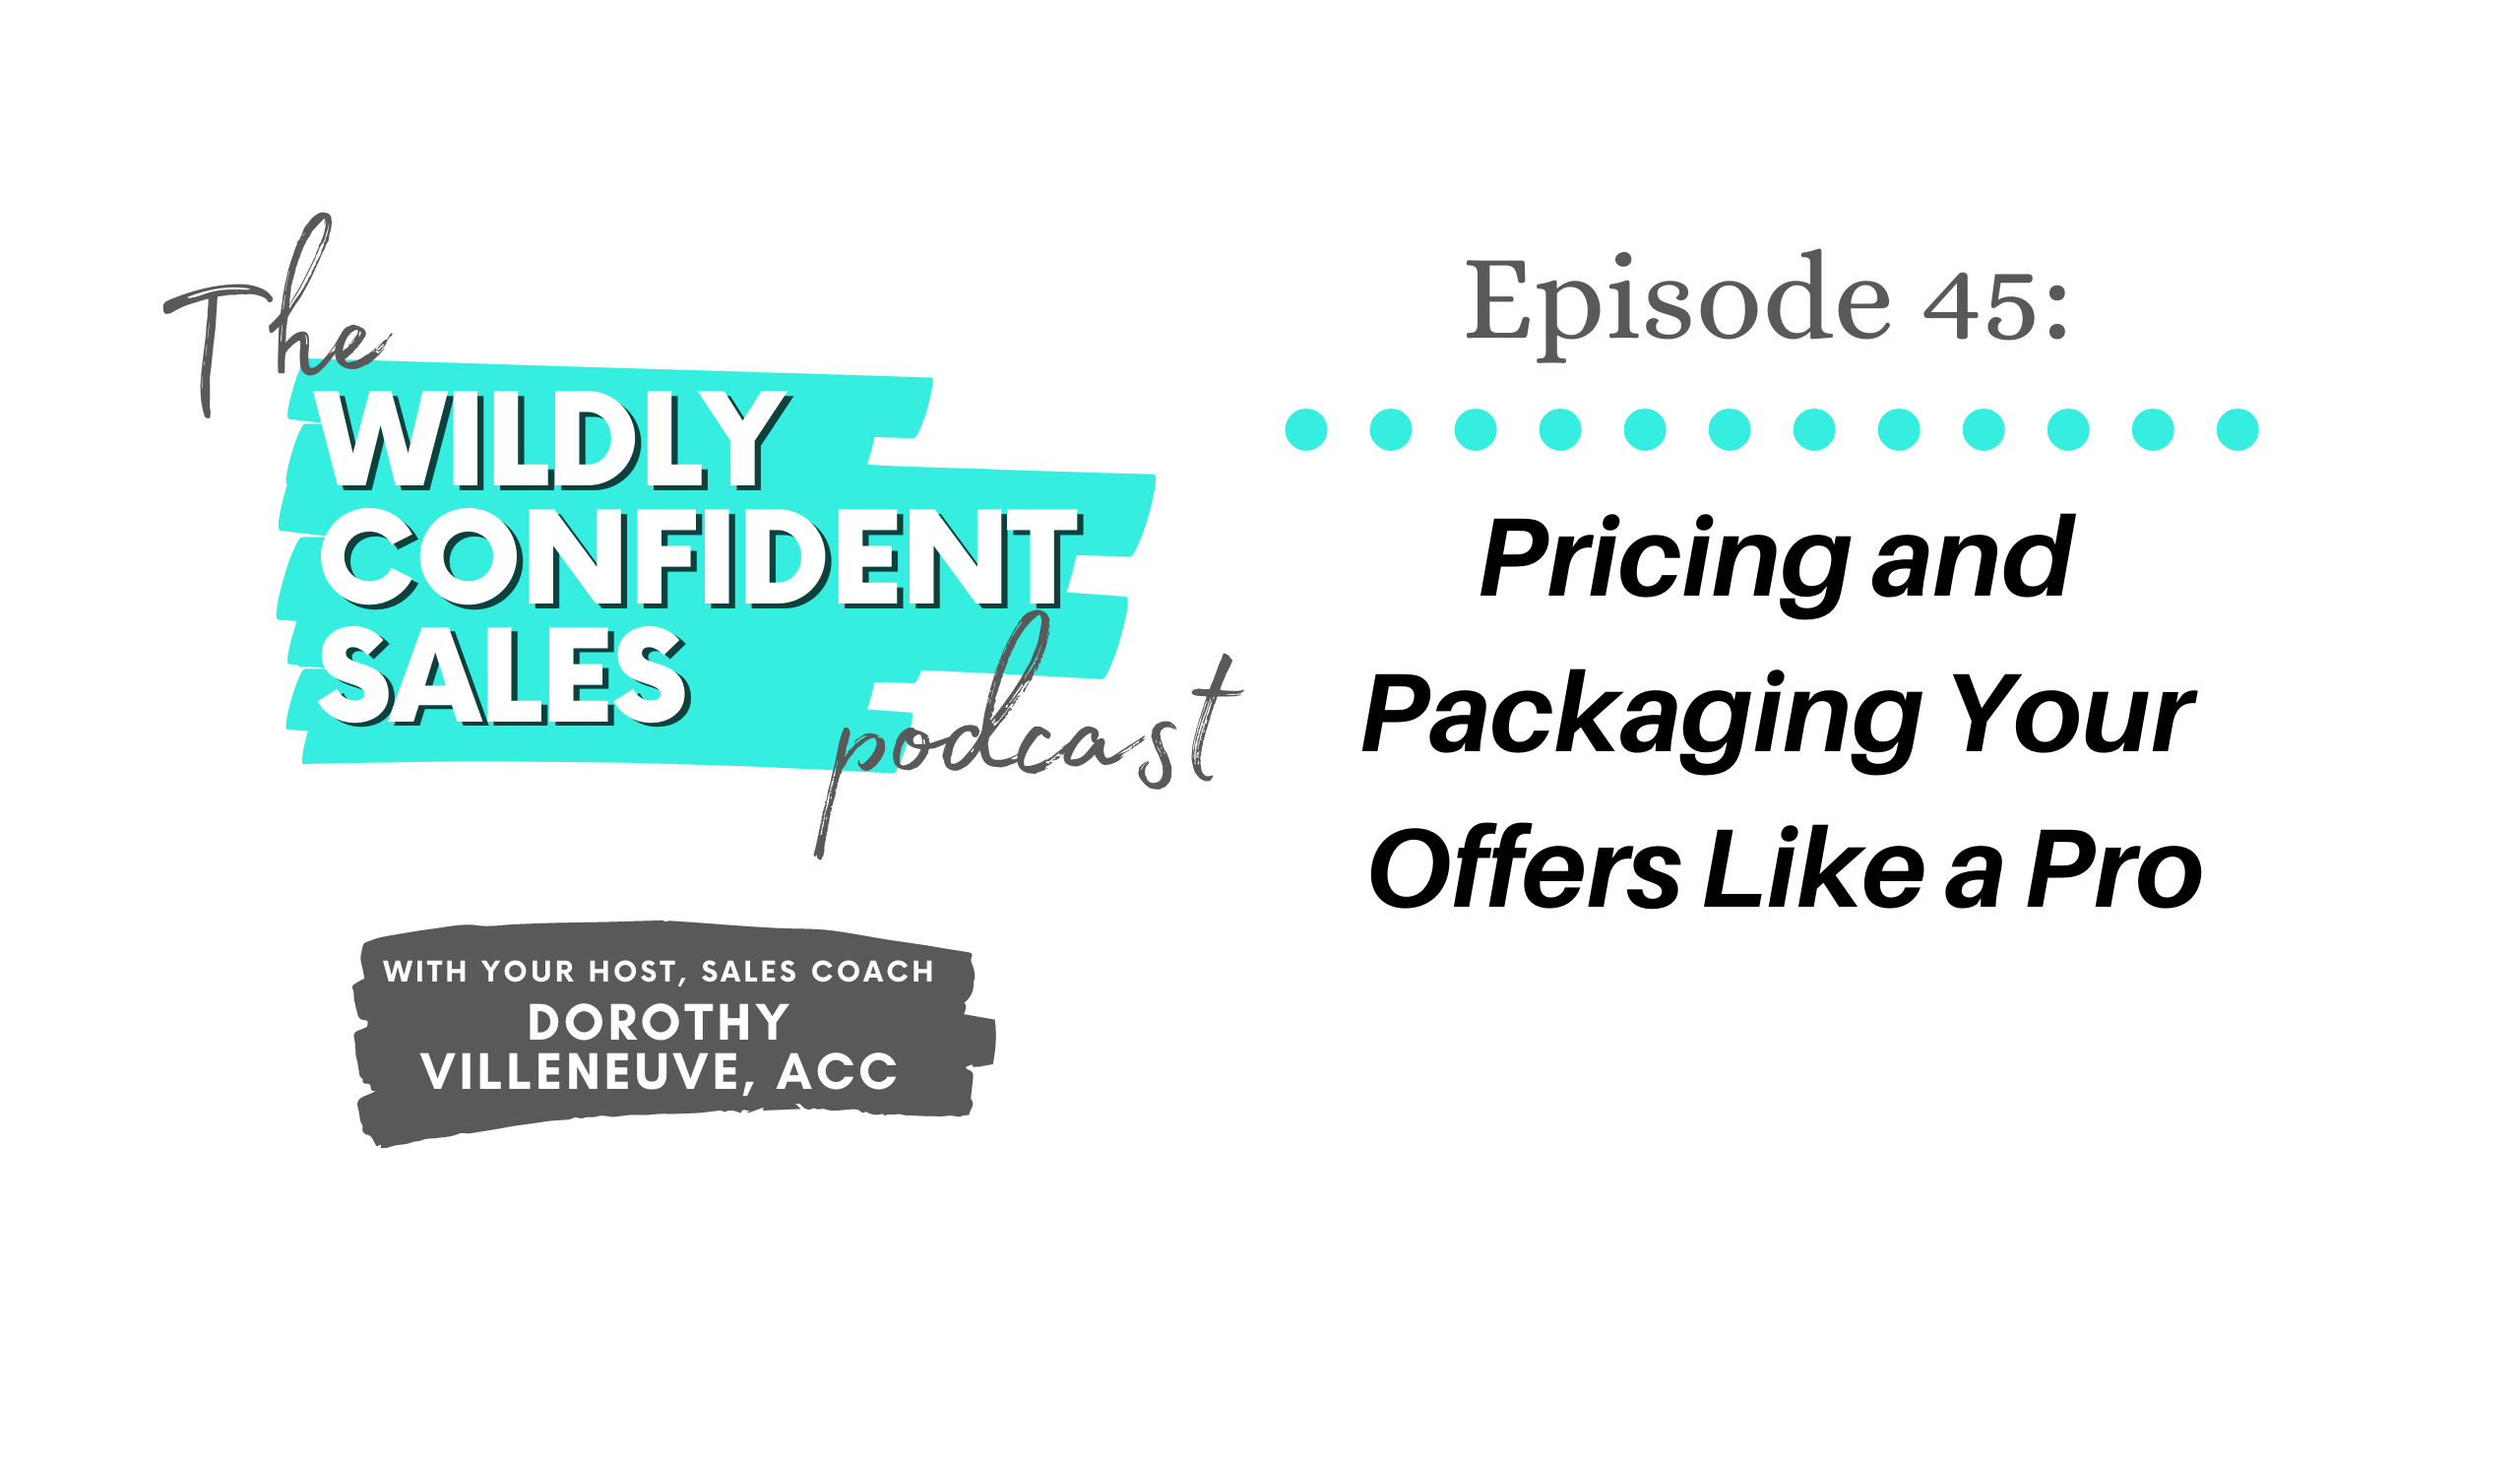 Pricing and Packaging Your Offers Like a Pro - Wildly Confident Sales with Dorothy Villeneuve